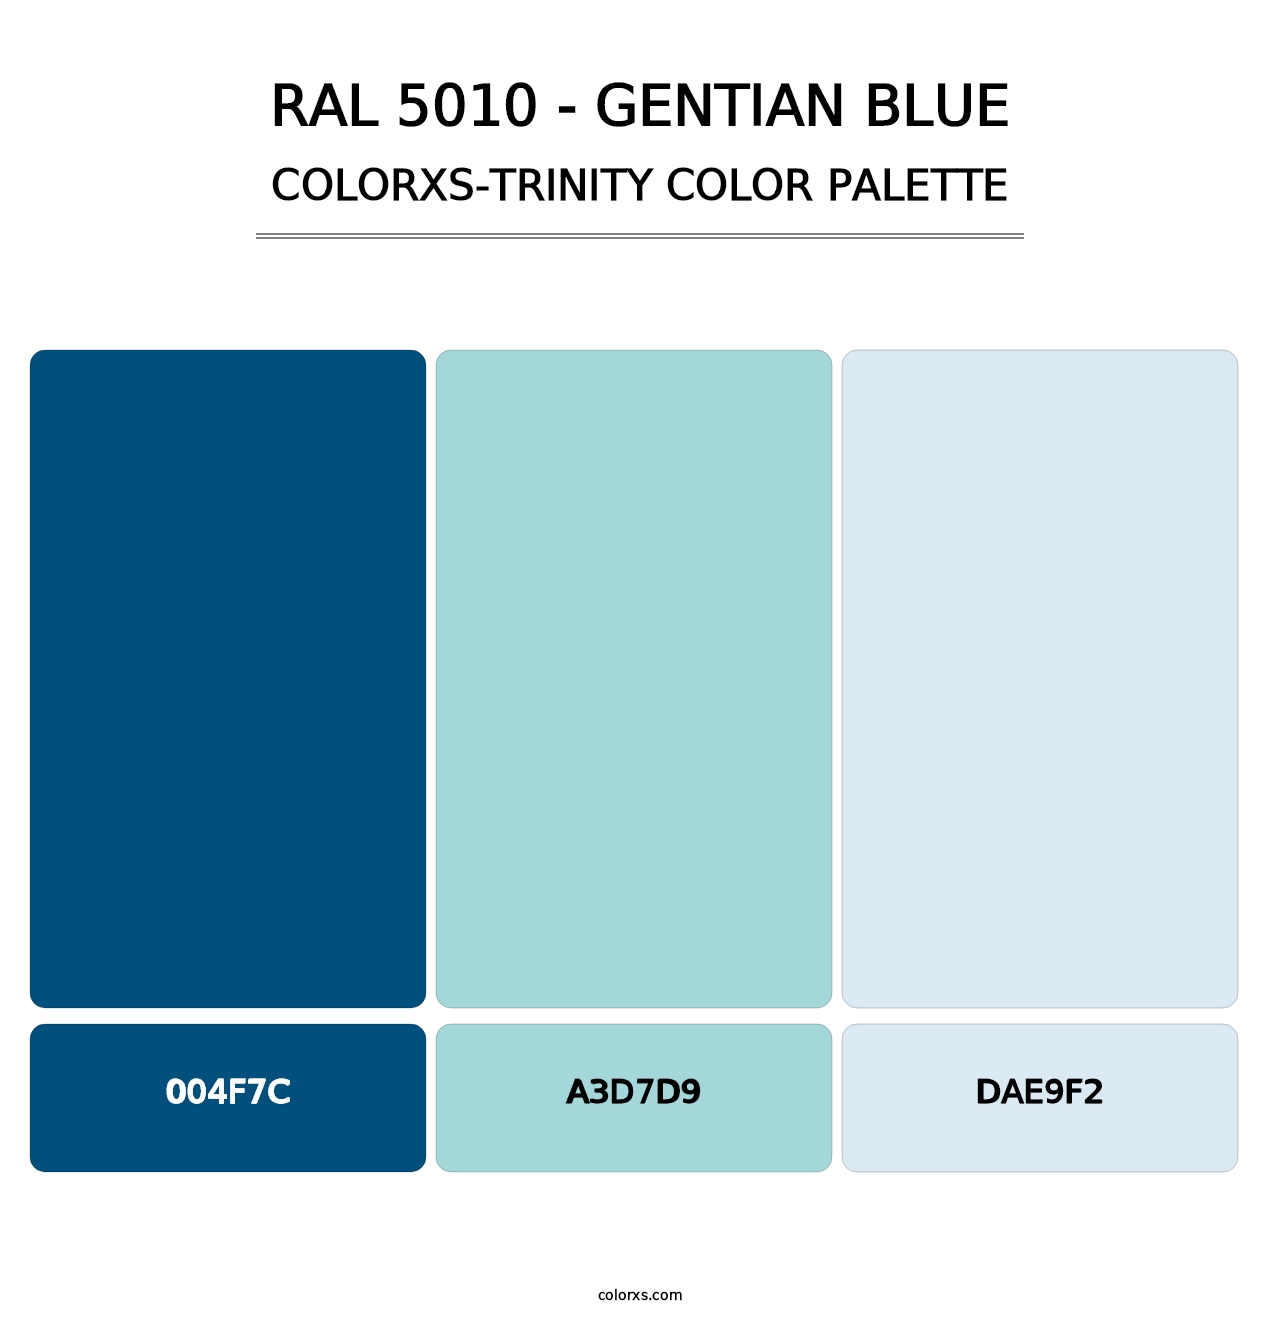 RAL 5010 - Gentian Blue - Colorxs Trinity Palette